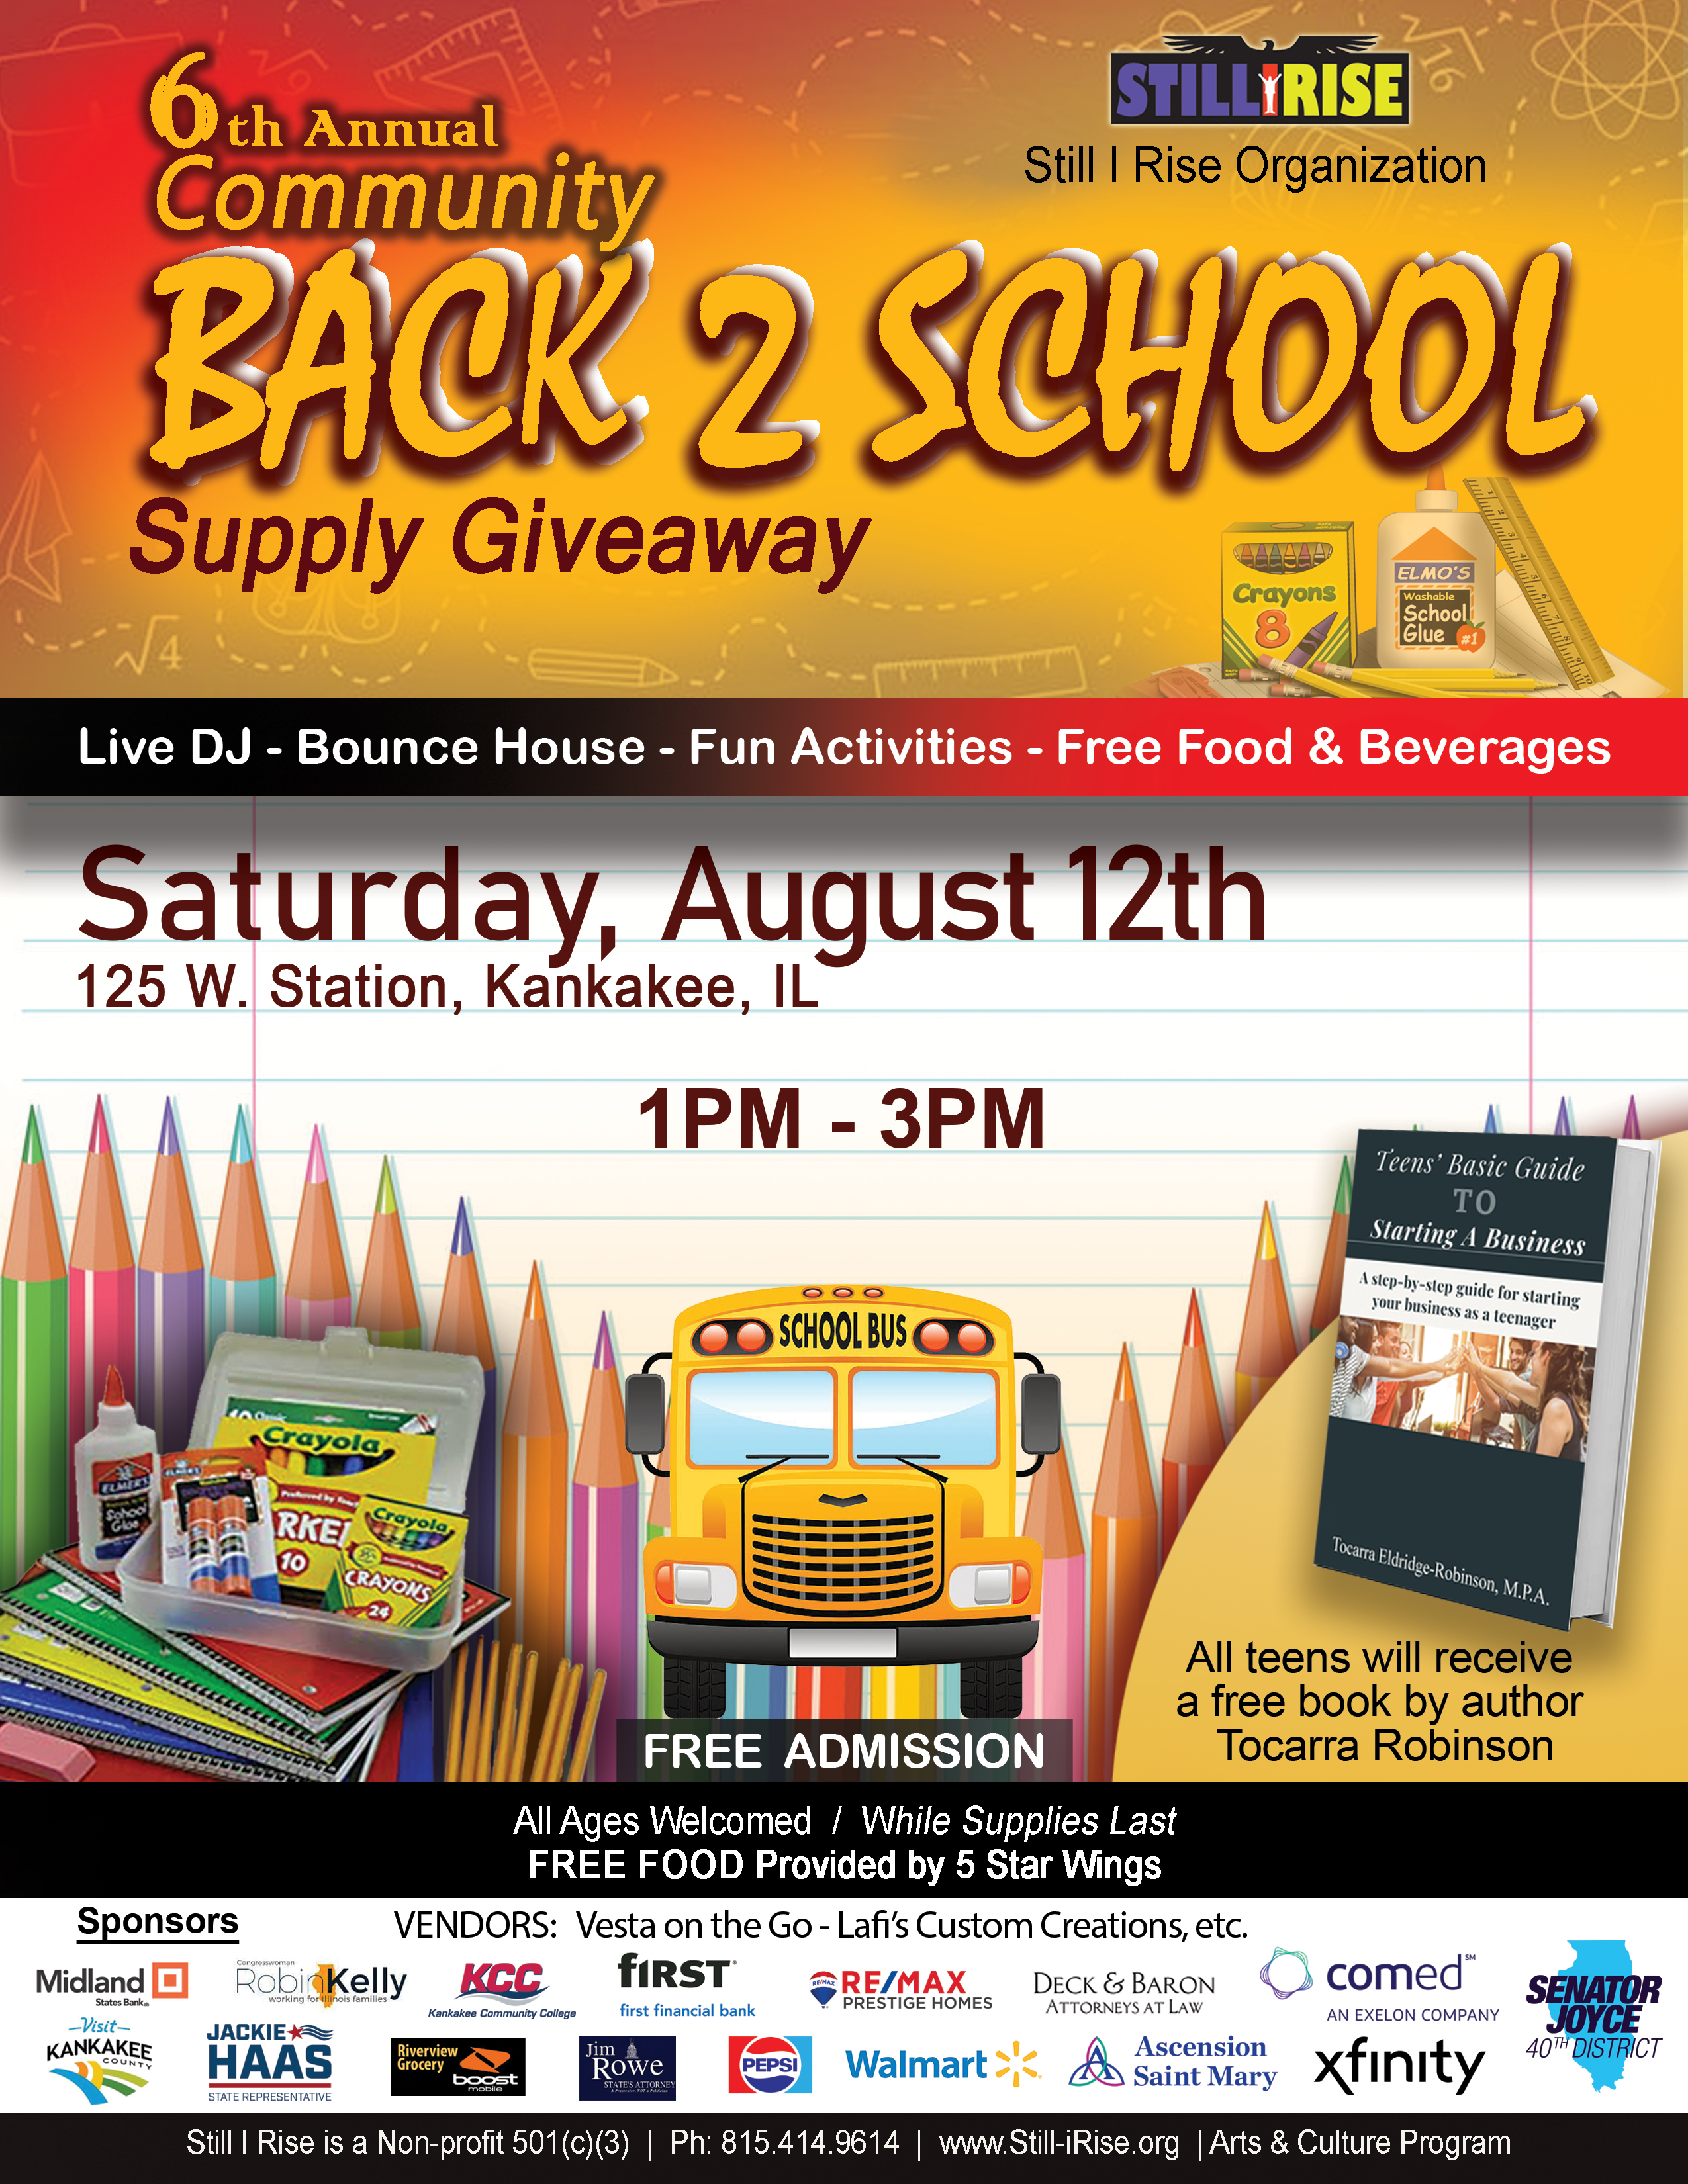 Still I Rise: 6th Annual Back to School Supply Giveaway